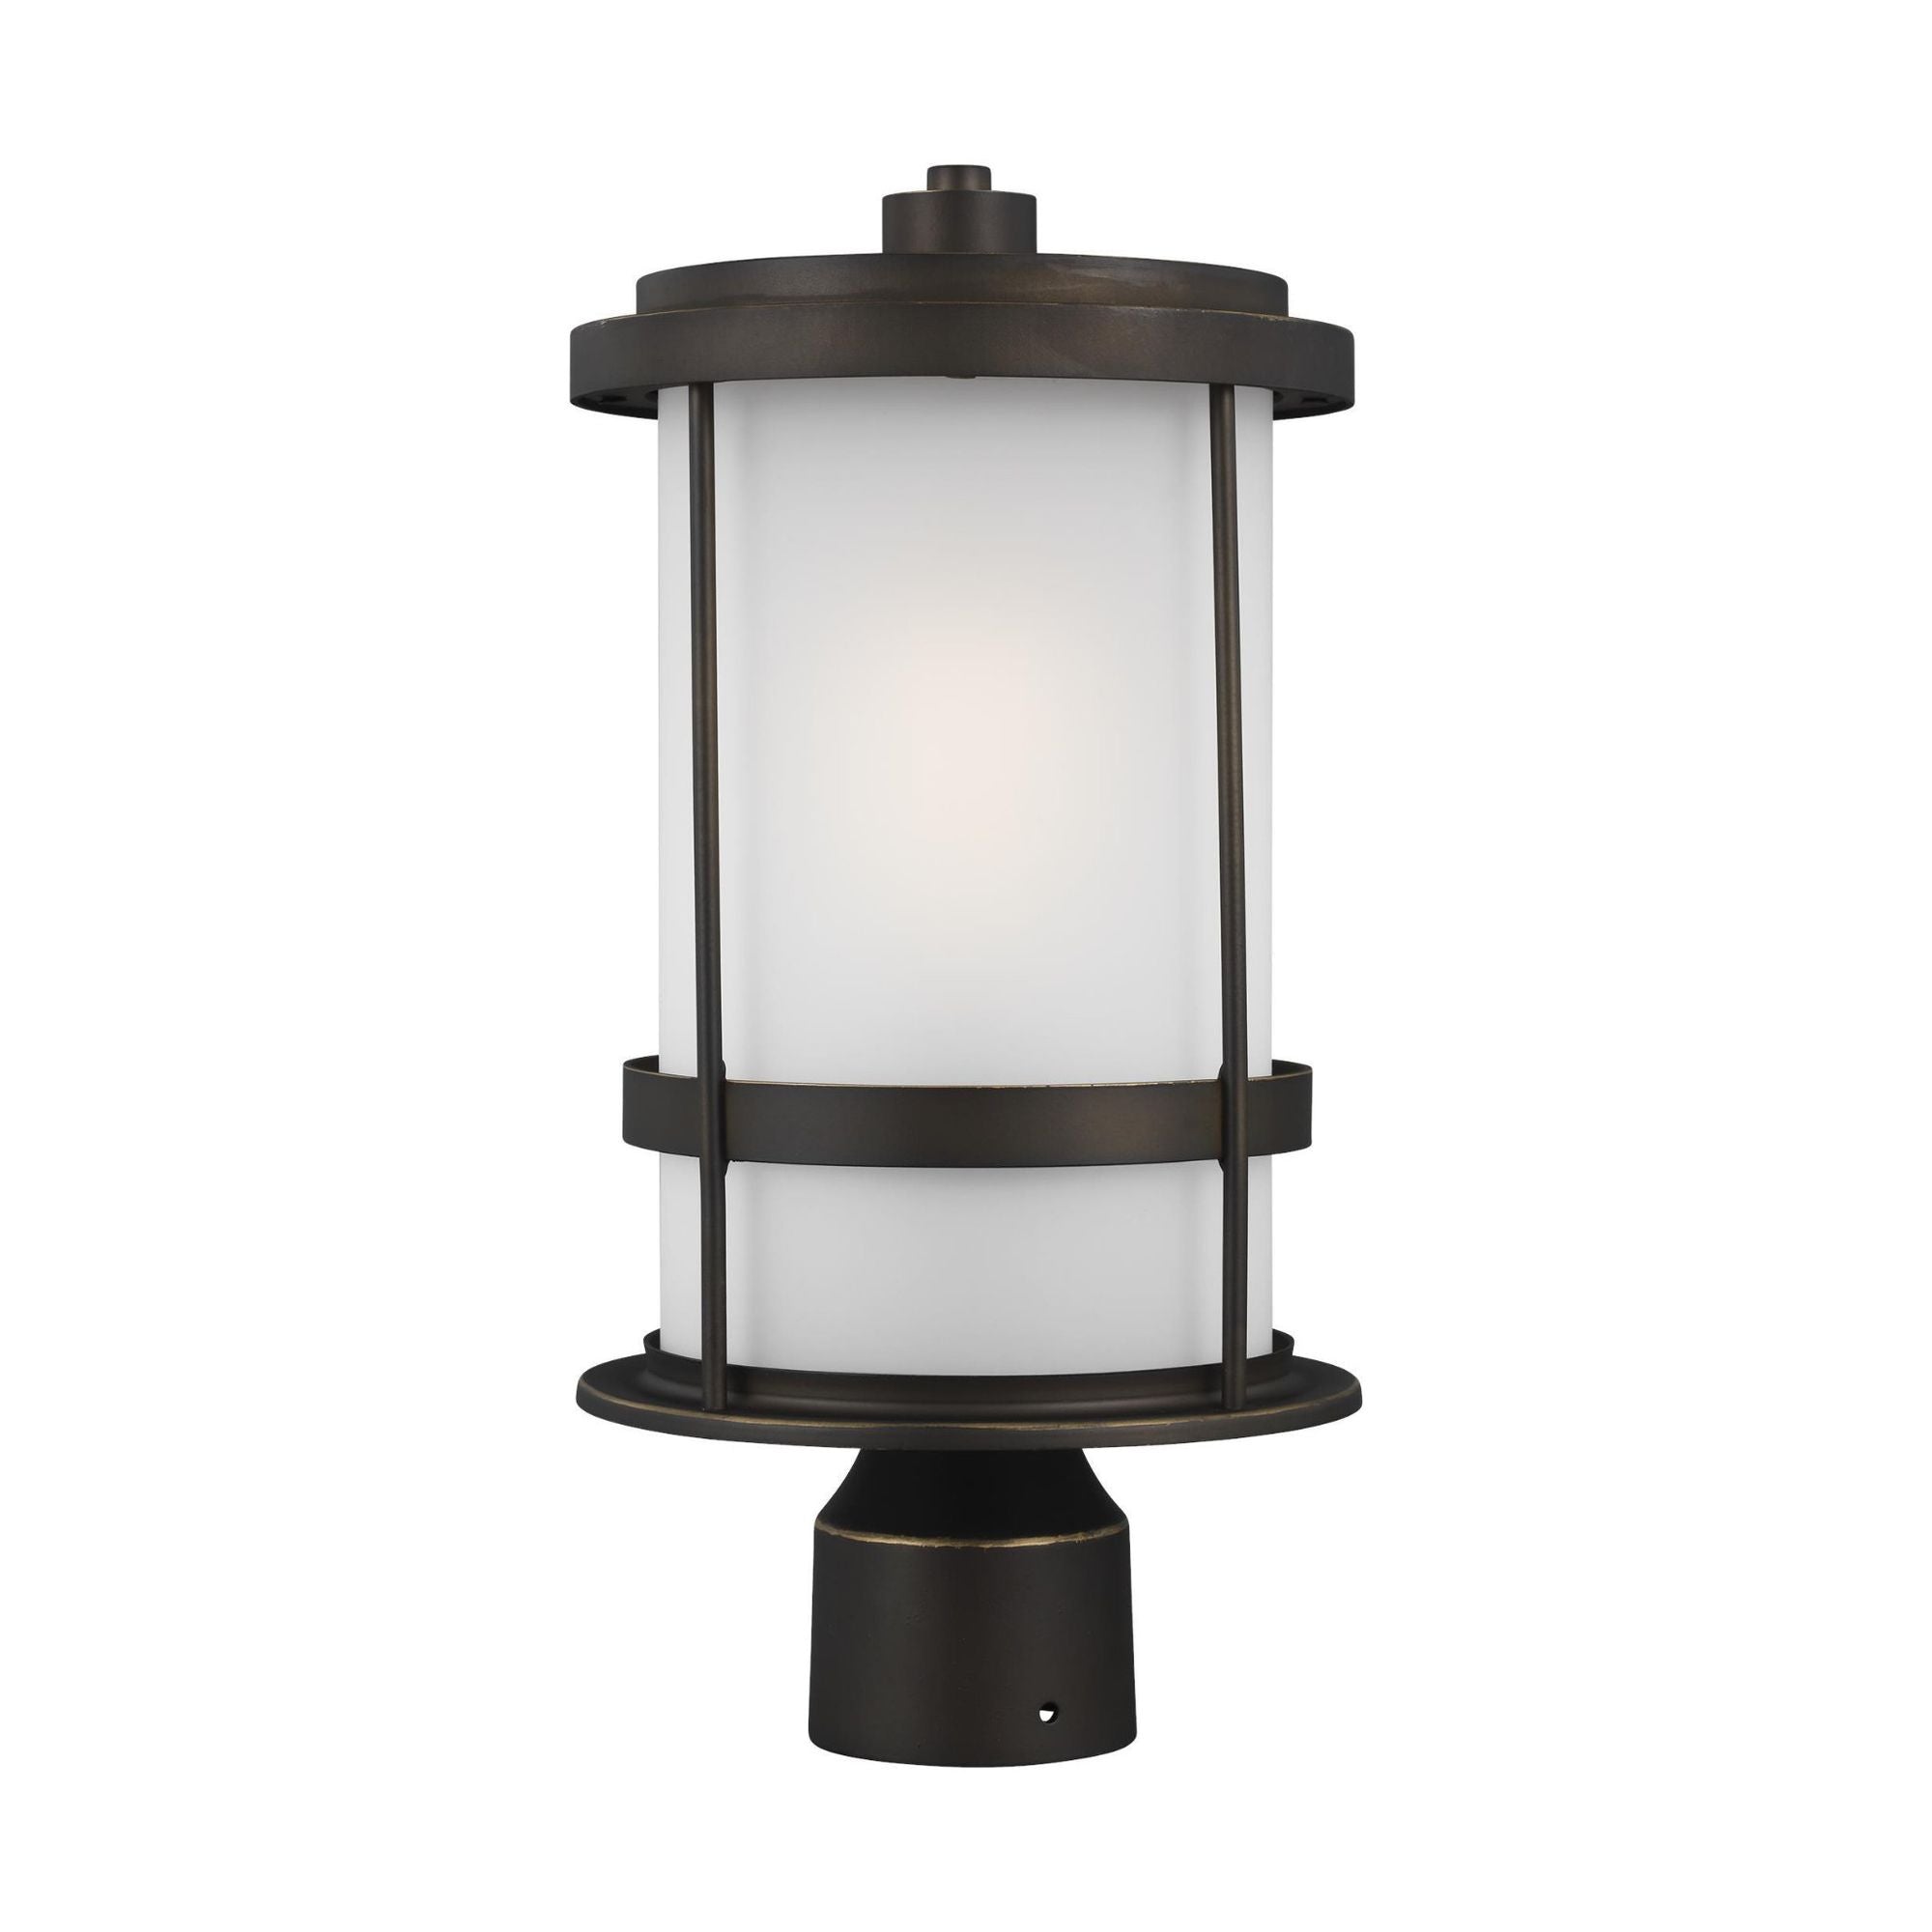 Wilburn One Light Outdoor Post Lantern LED Transitional Fixture 16.125" Height Aluminum Round Satin Etched Shade in Antique Bronze